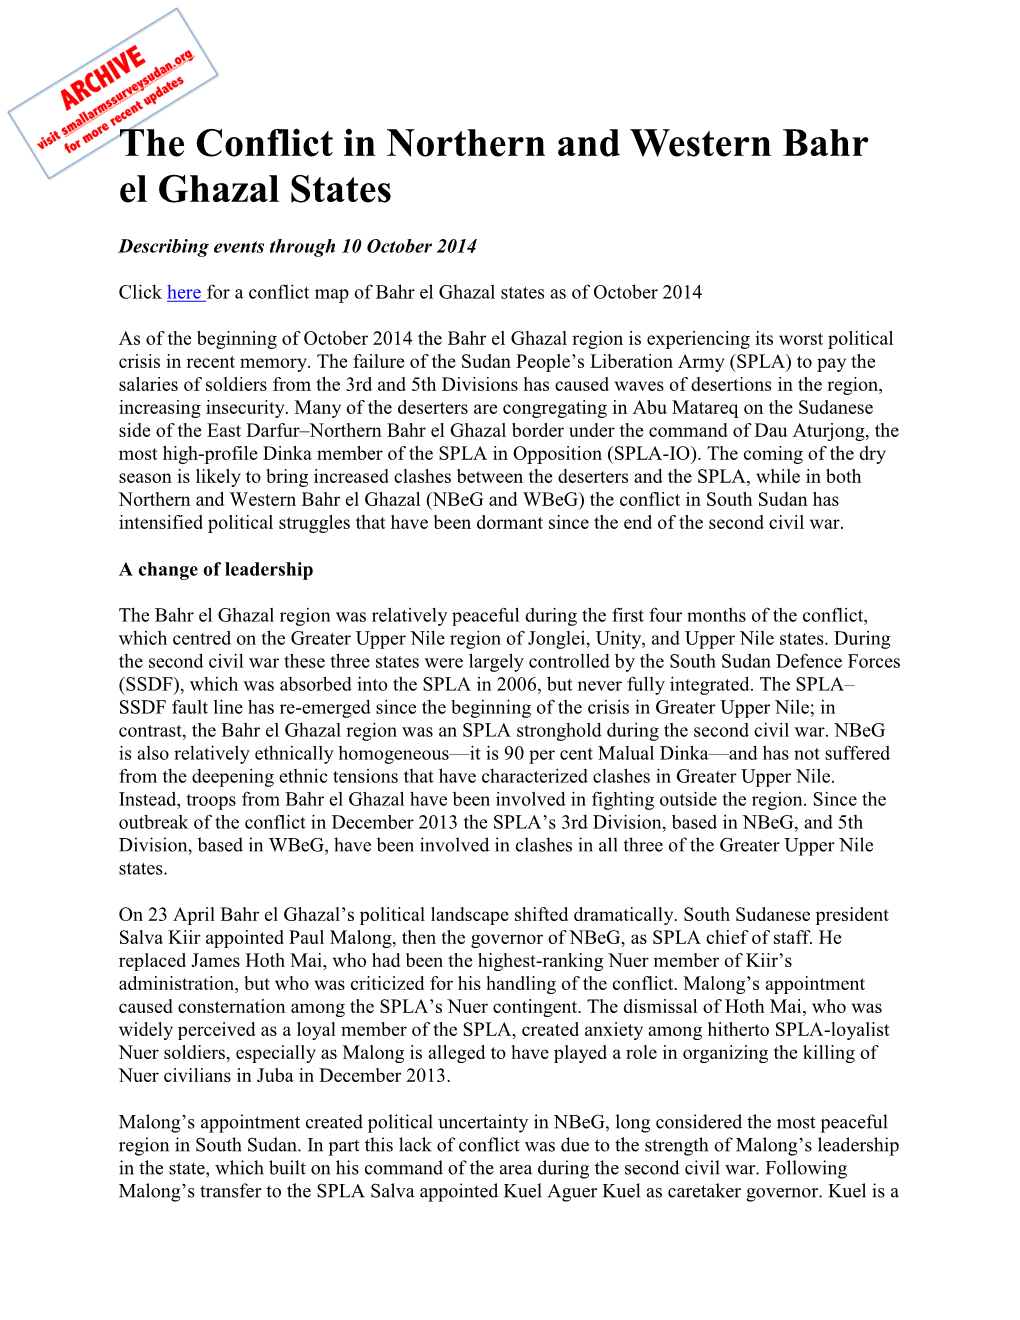 The Conflict in Northern and Western Bahr El Ghazal States